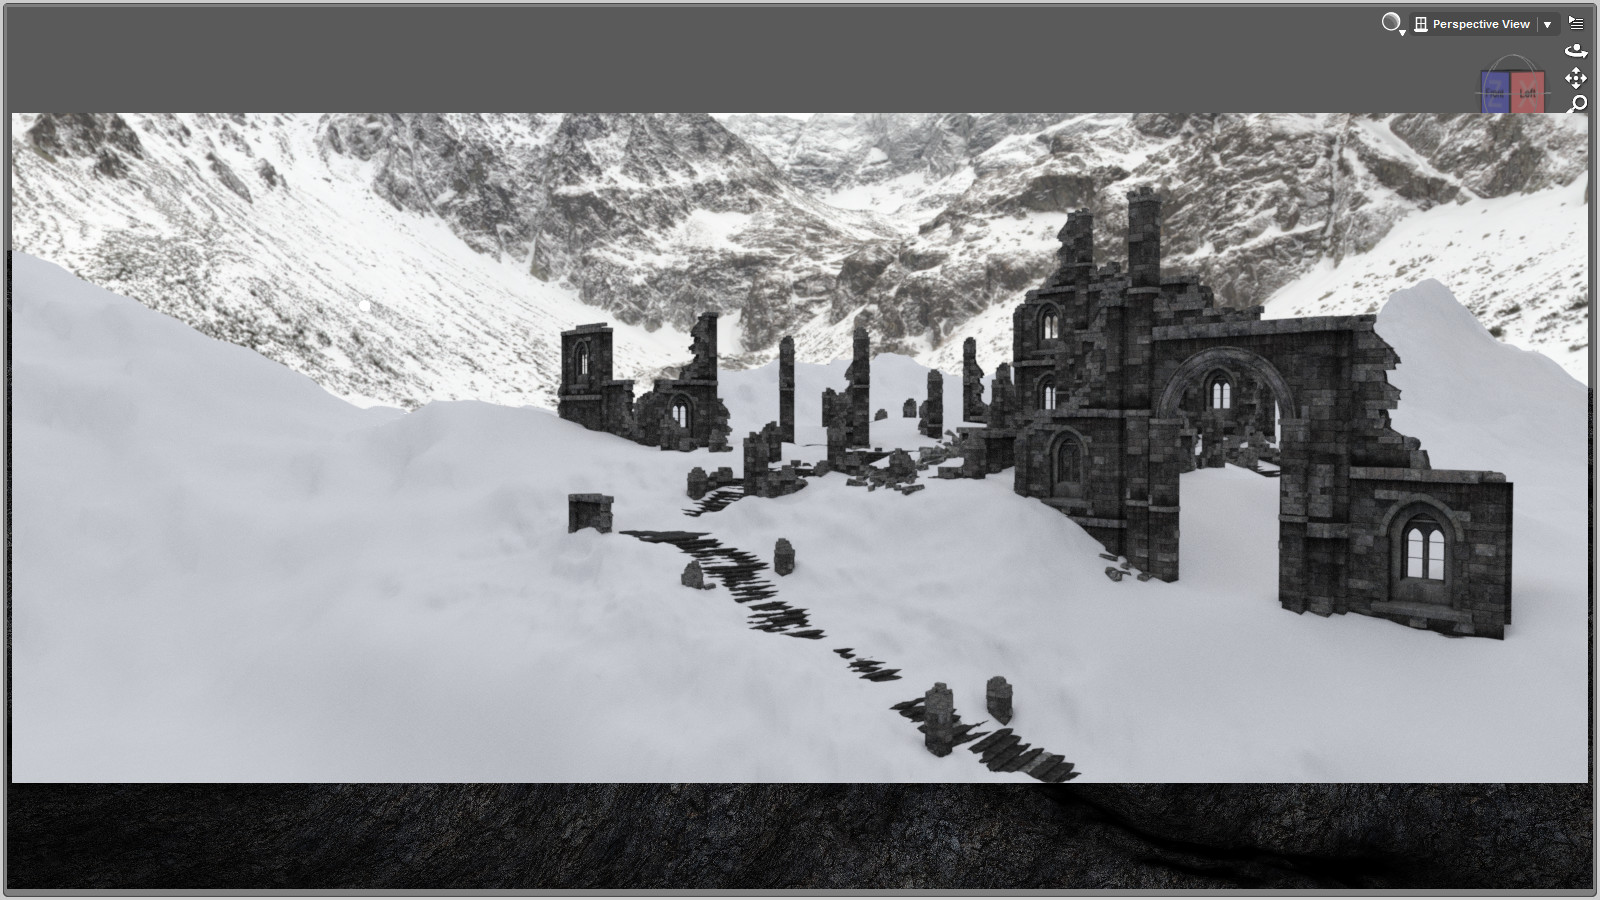 Set - 3Delight shaders with a basic snow shader over the whole terrain...